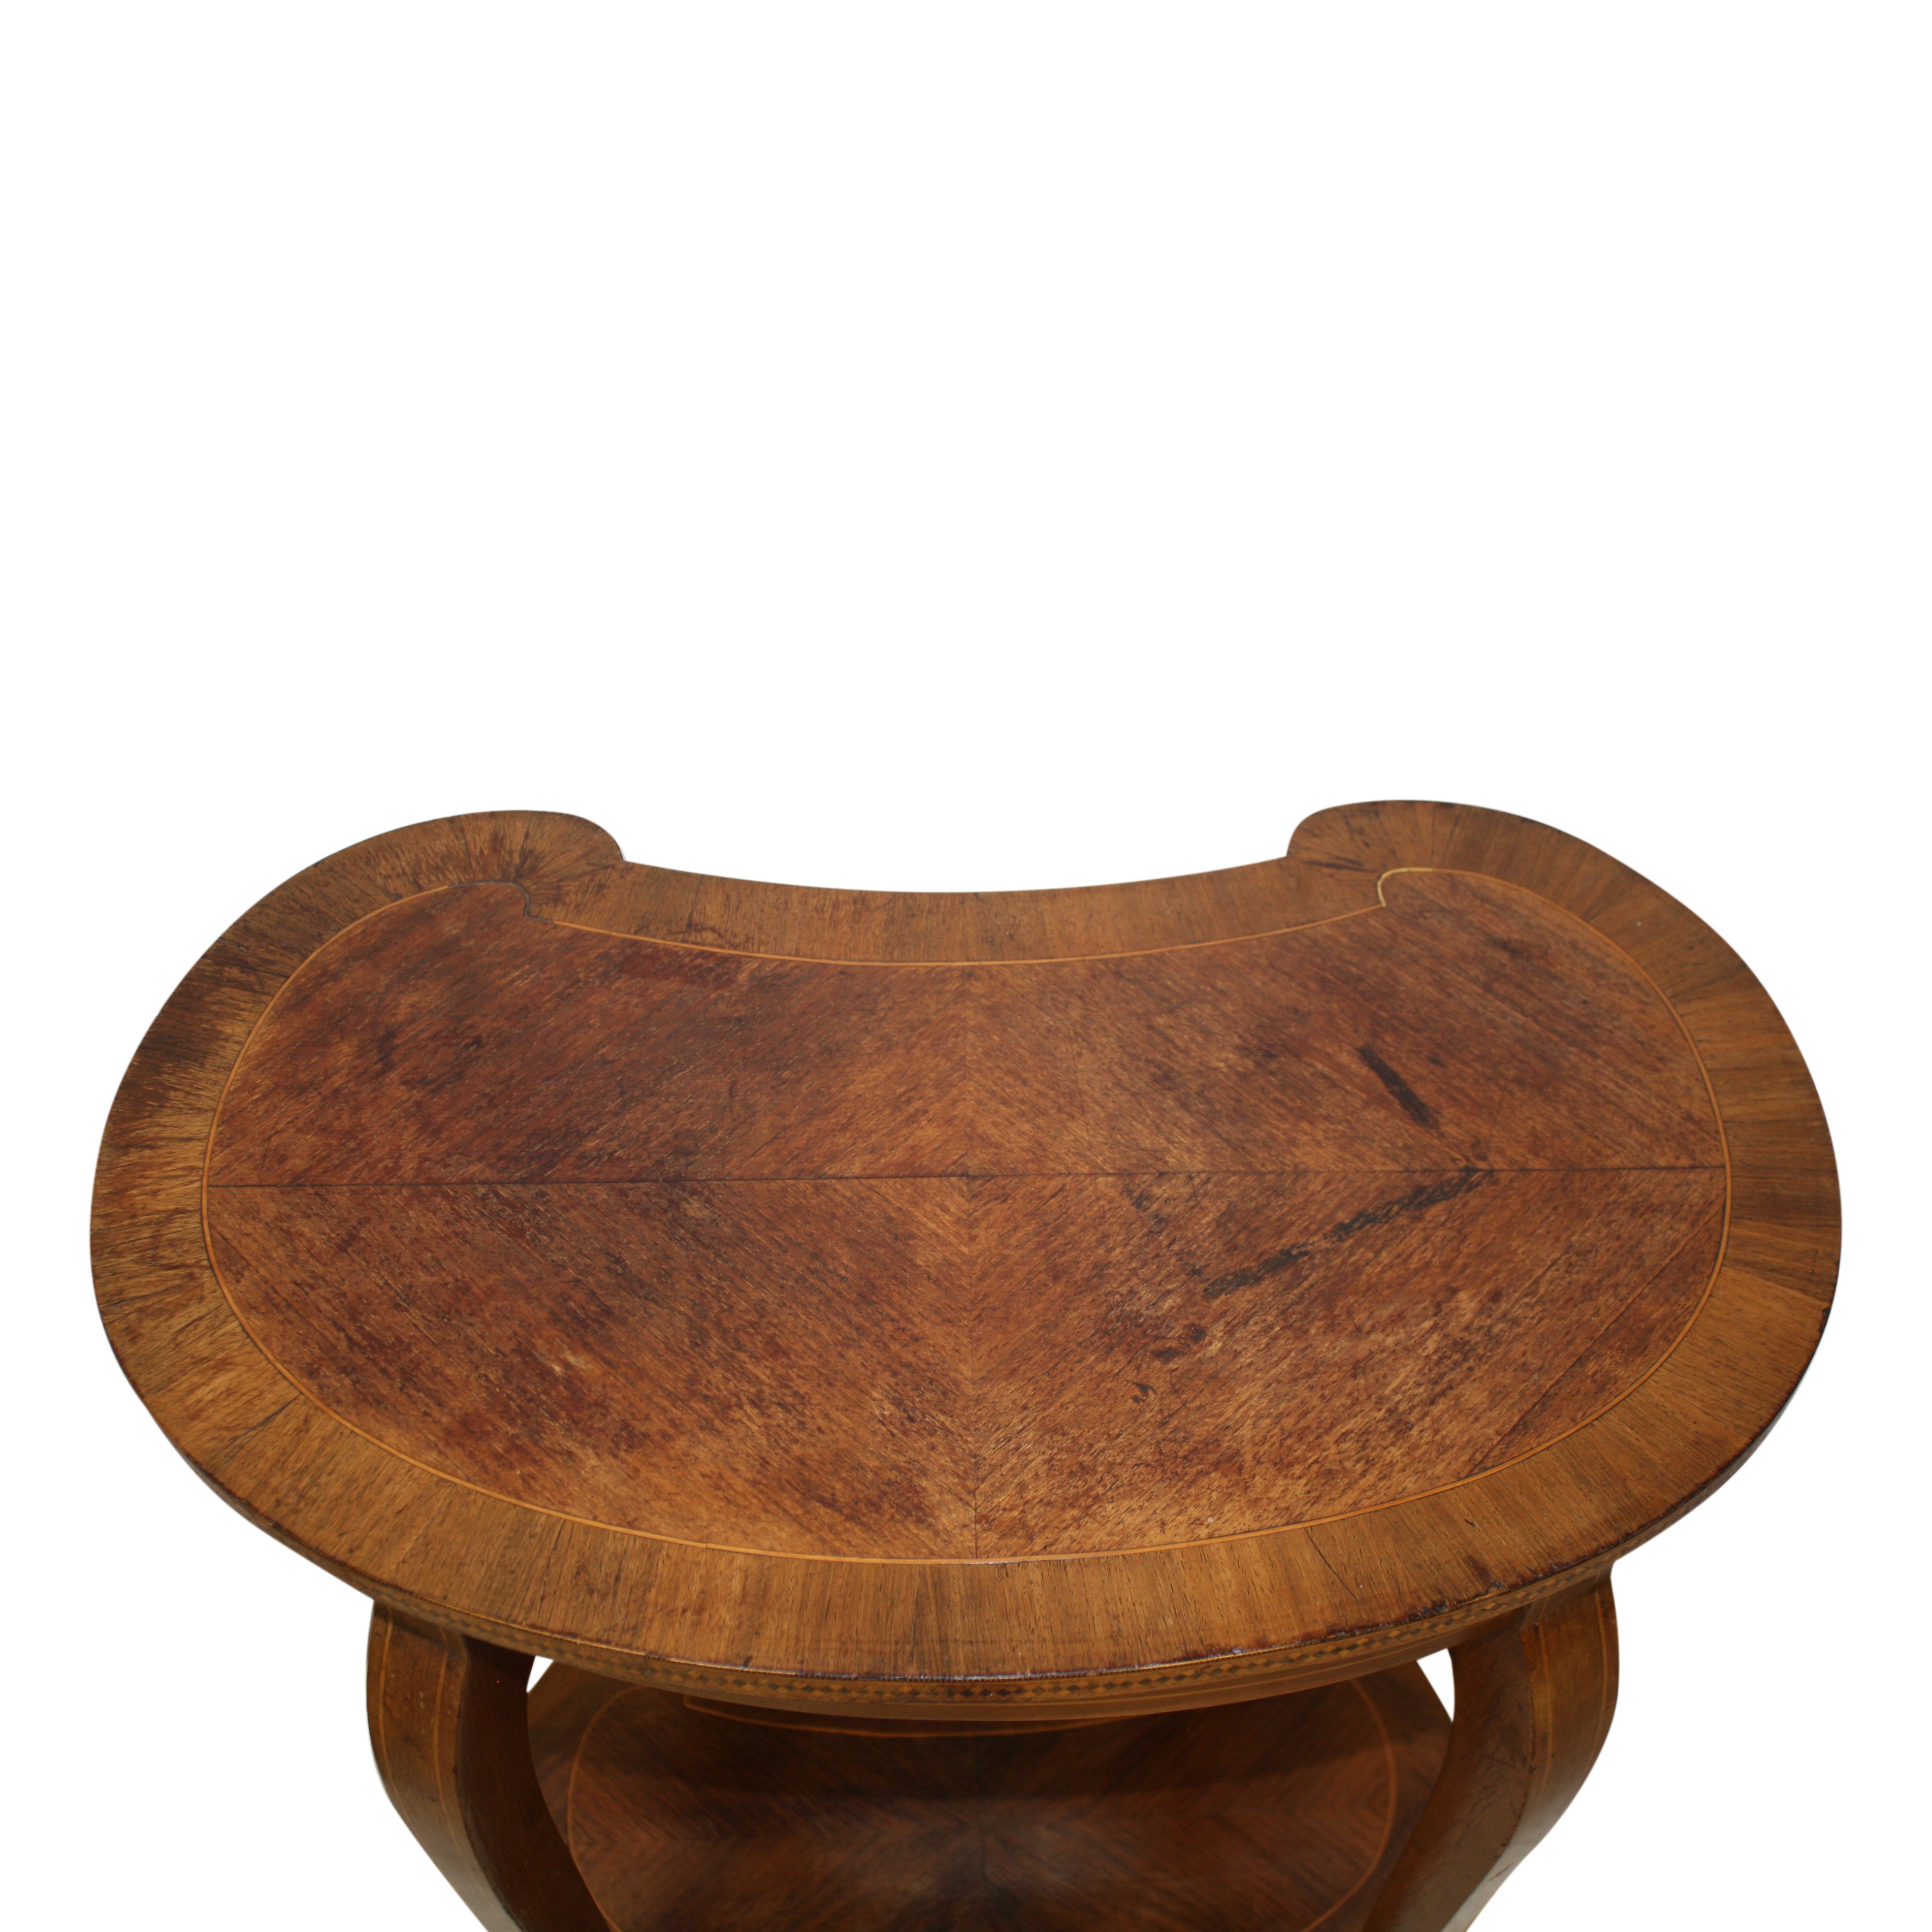 Kidney Shaped End Table with Inlays